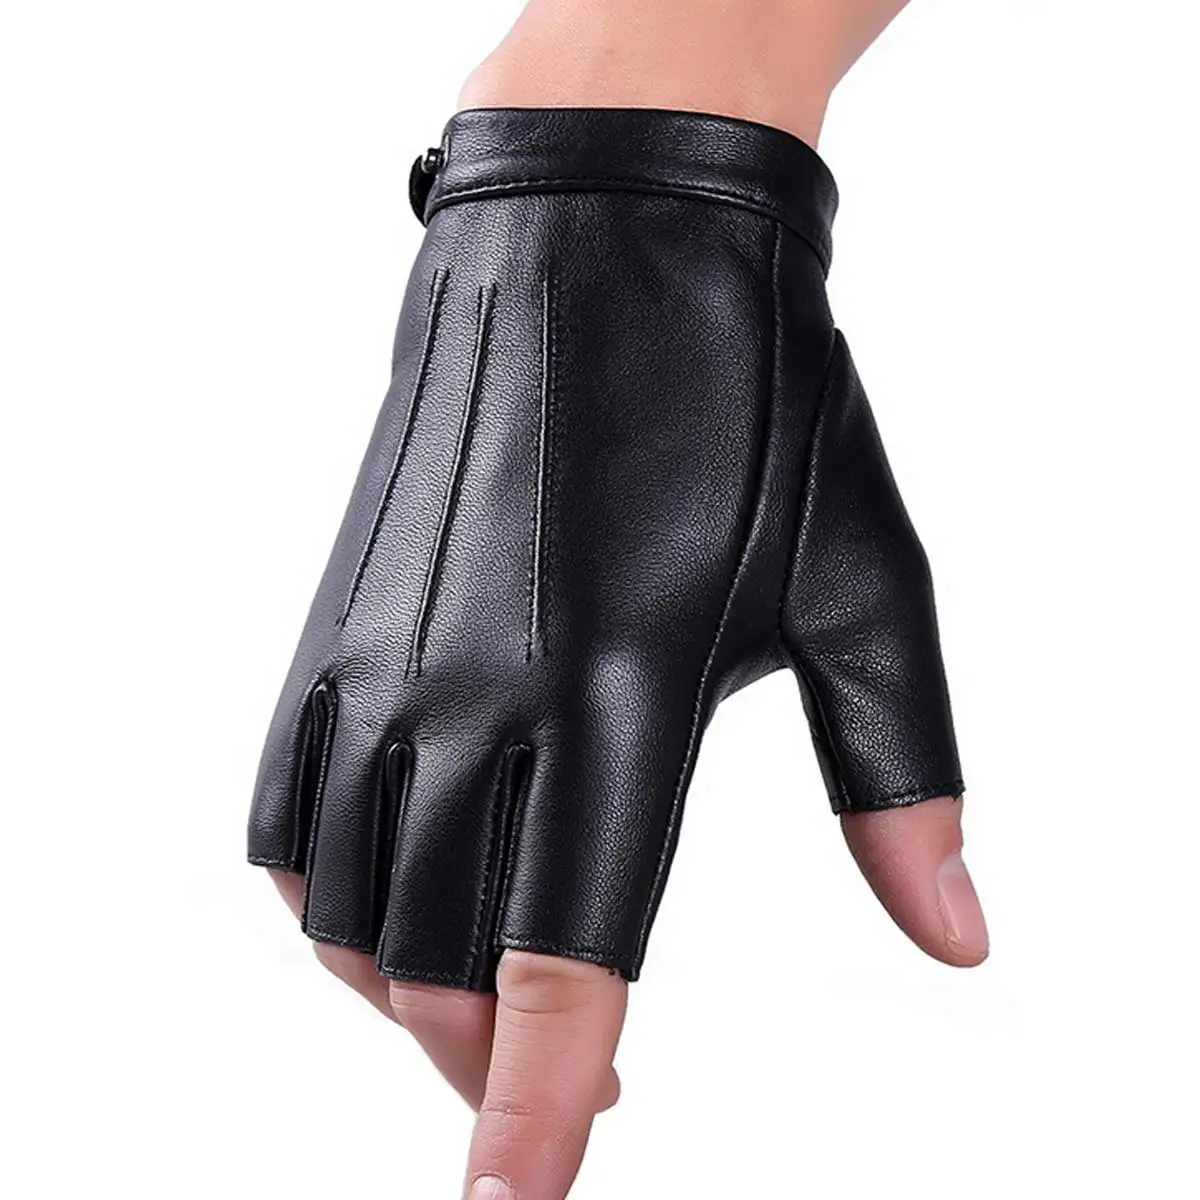 Wholesale Driving Warm Winter Touch Screen Leather Fashion Man Black Pu Gloves For Motorcycle Car